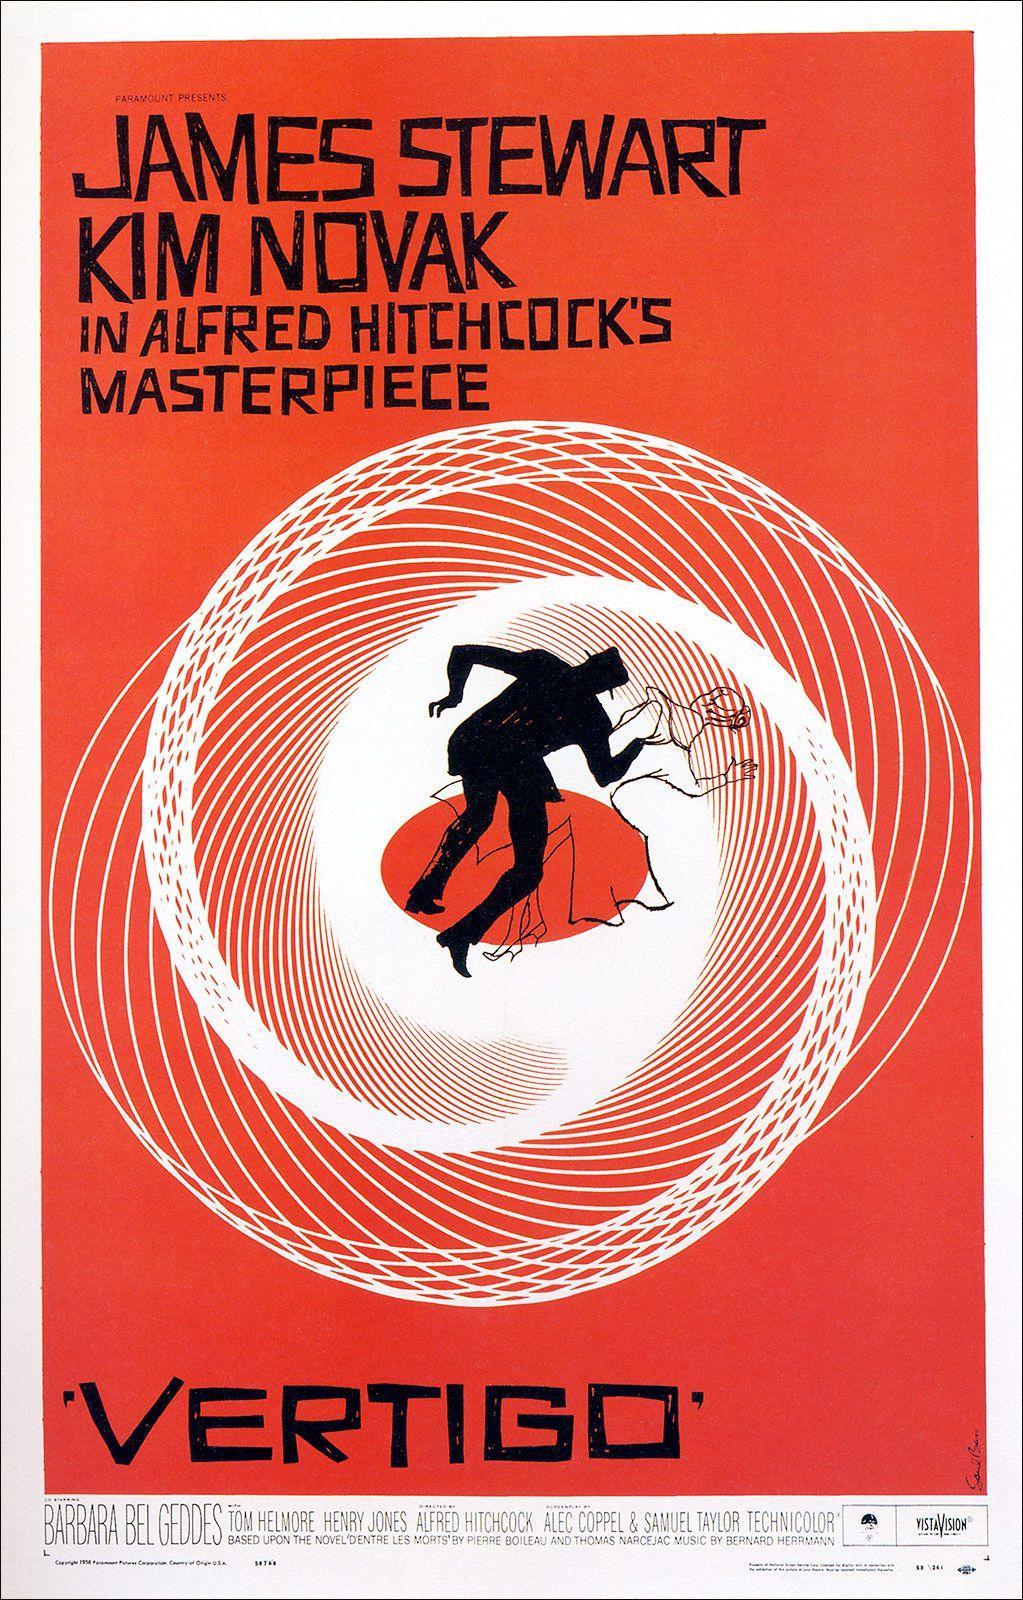 The Big Idea Designers Another hugely important designer from this period is Saul Bass, who is best known for his movie poster designs.